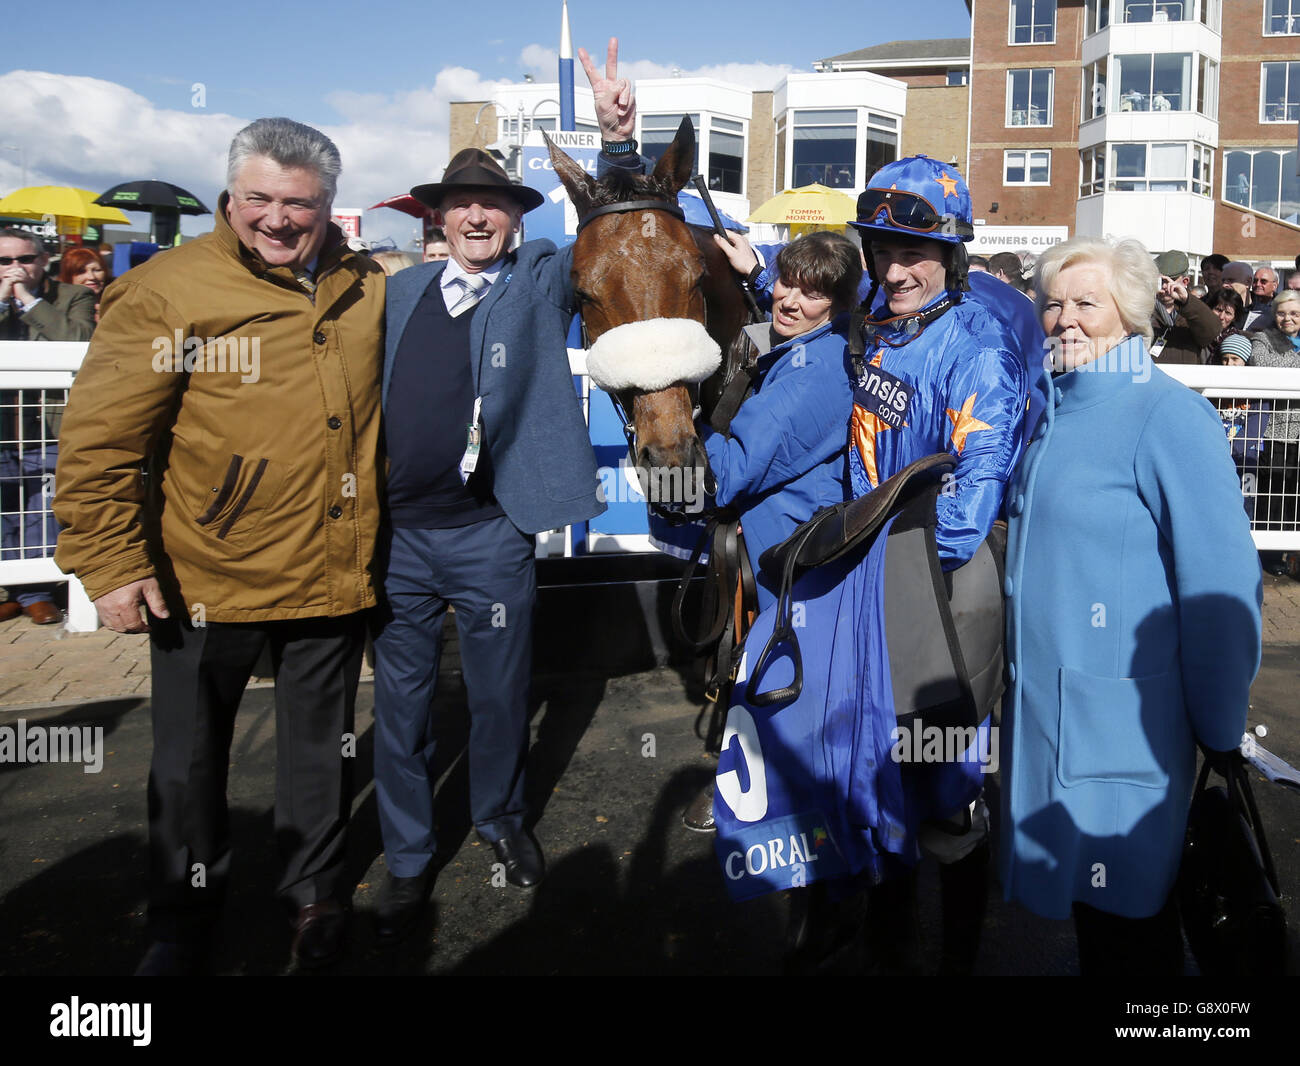 Jockey Sam Twiston-Davies (2nd right) with Vicente winner of the Coral Scottish Grand National Handicap Steeple Chase (Class1)(Grade 3) during Scottish Grand National Day at the Coral Scottish Grand National Festival at Ayr Racecourse. Stock Photo